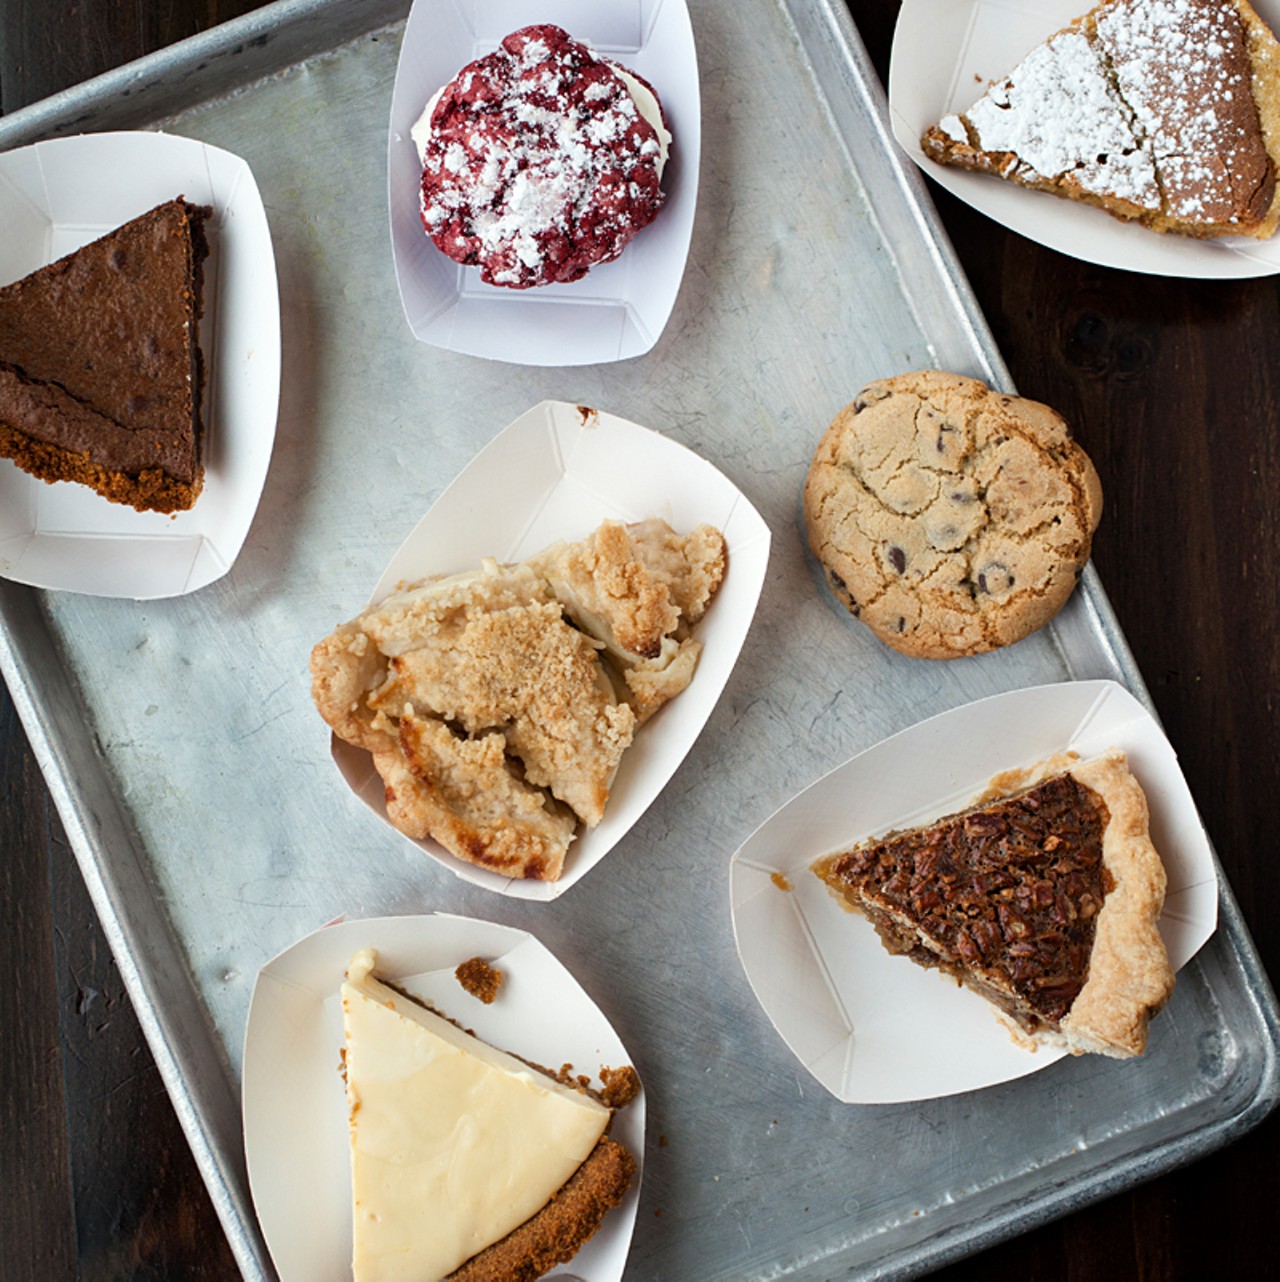 Just some of your dessert choices, by the slice...